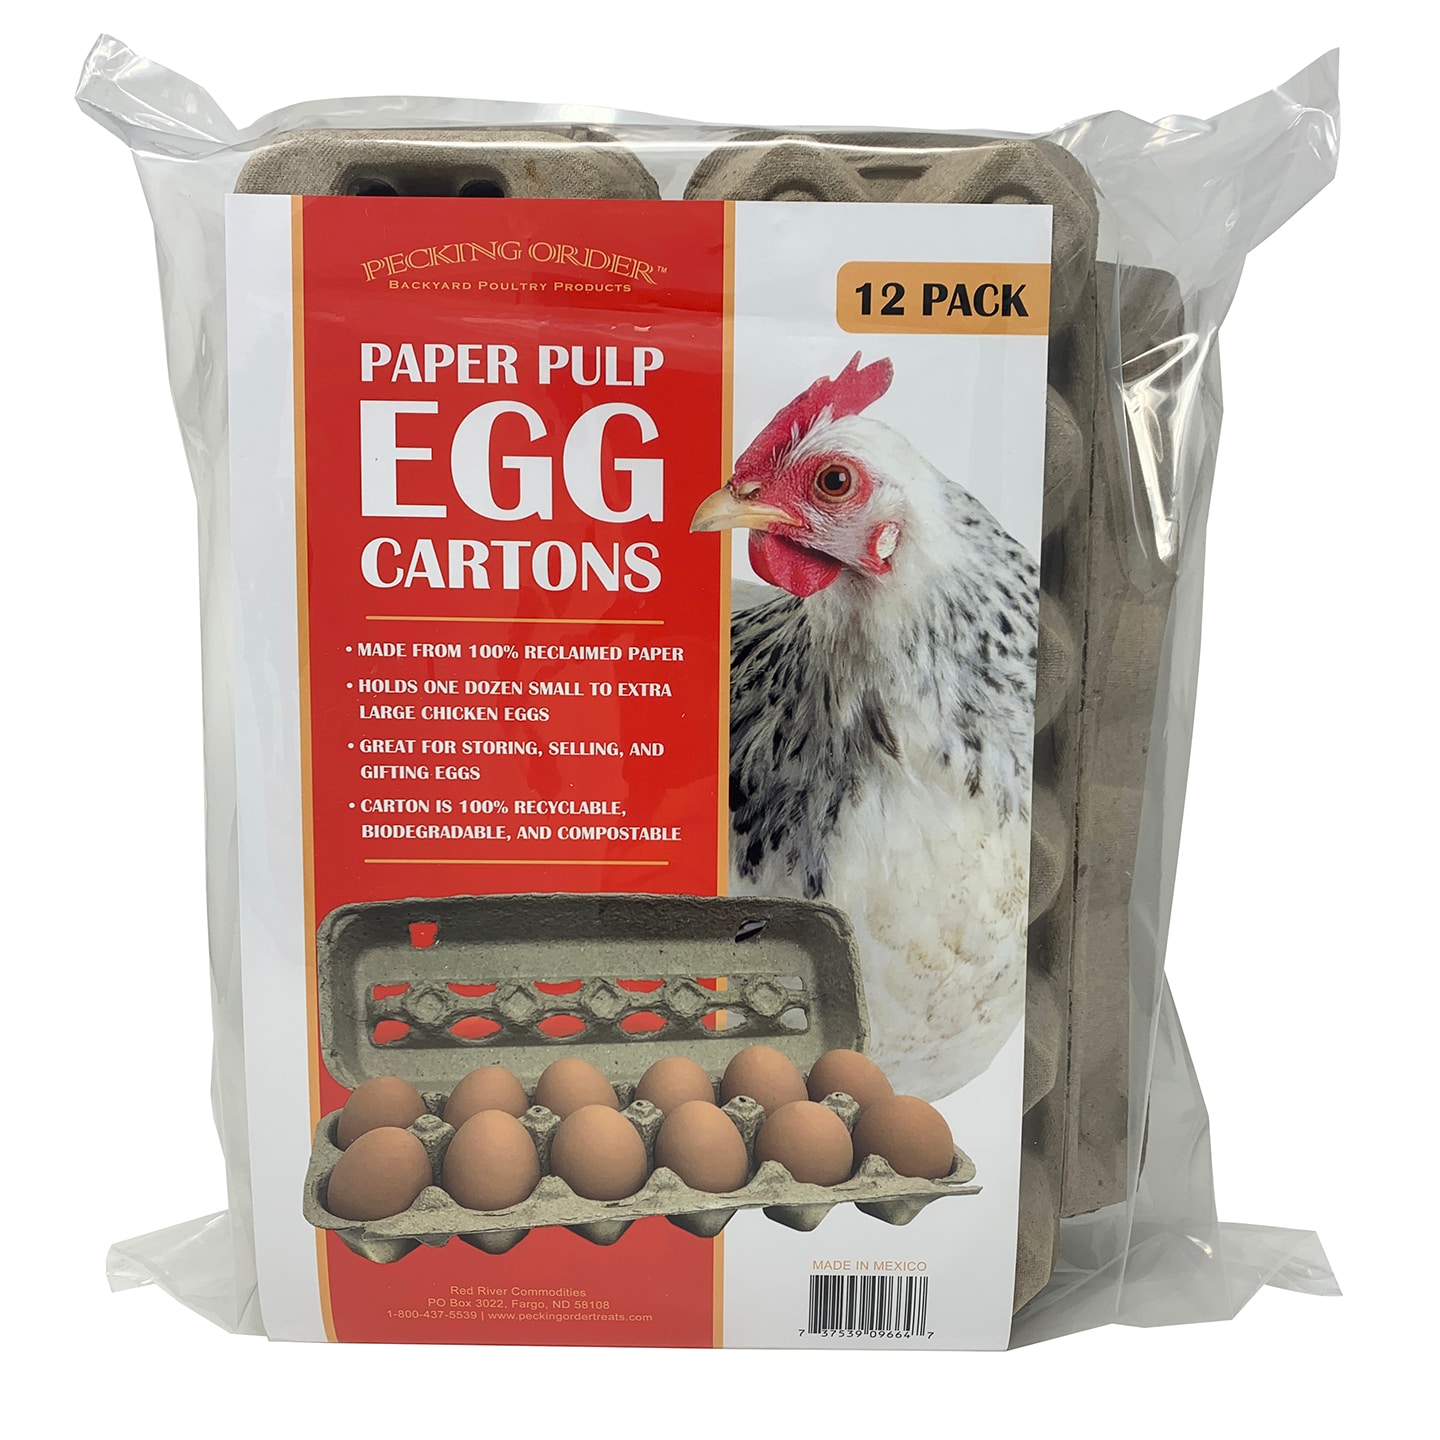 Pecking Order Paper Pulp Egg Cartons - 12 Pack